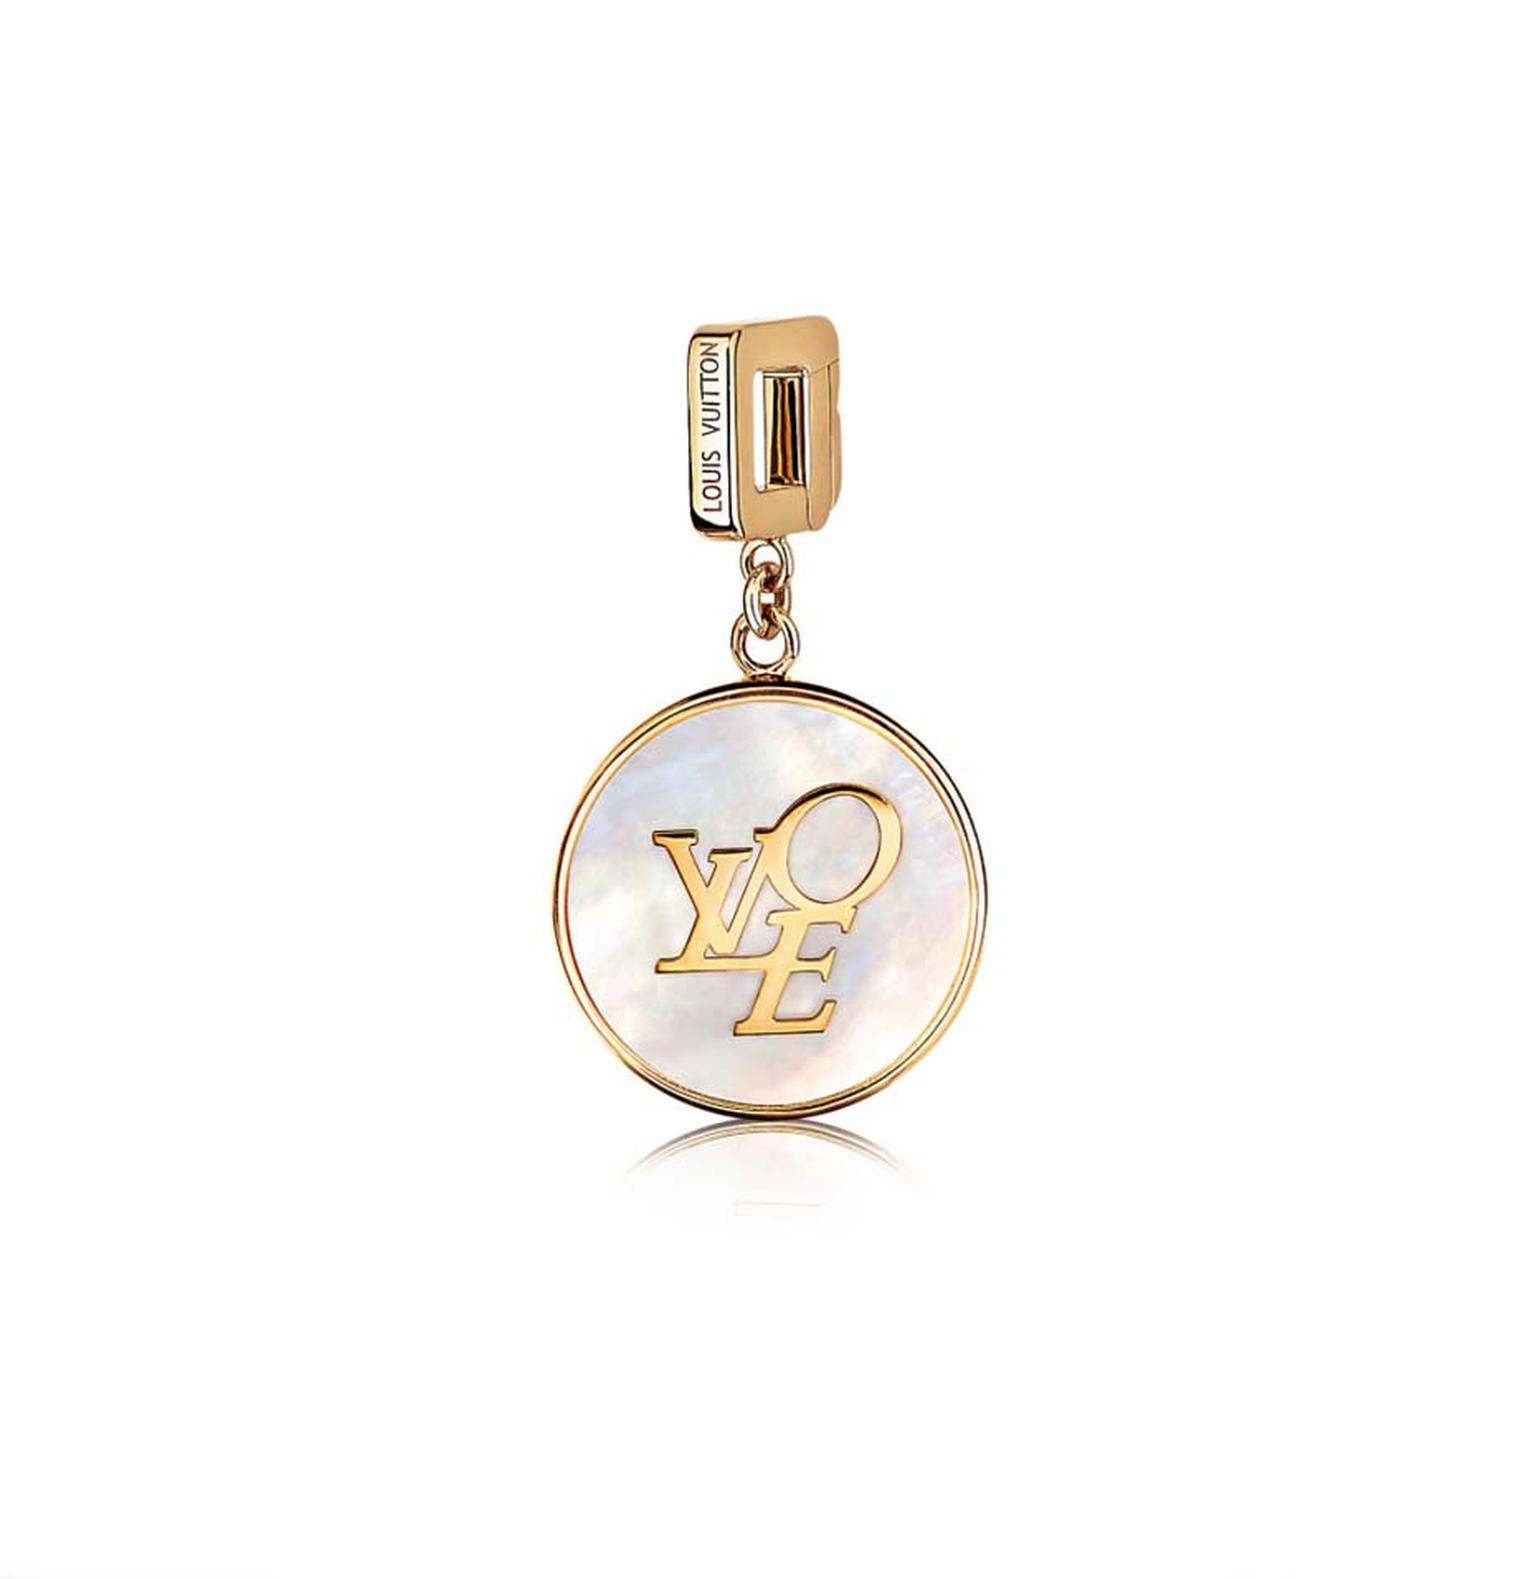 Louis Vuitton rose gold and mother-of-pearl Love pendant, which can be worn on a bracelet or as a pendant on a necklace (£2,200).